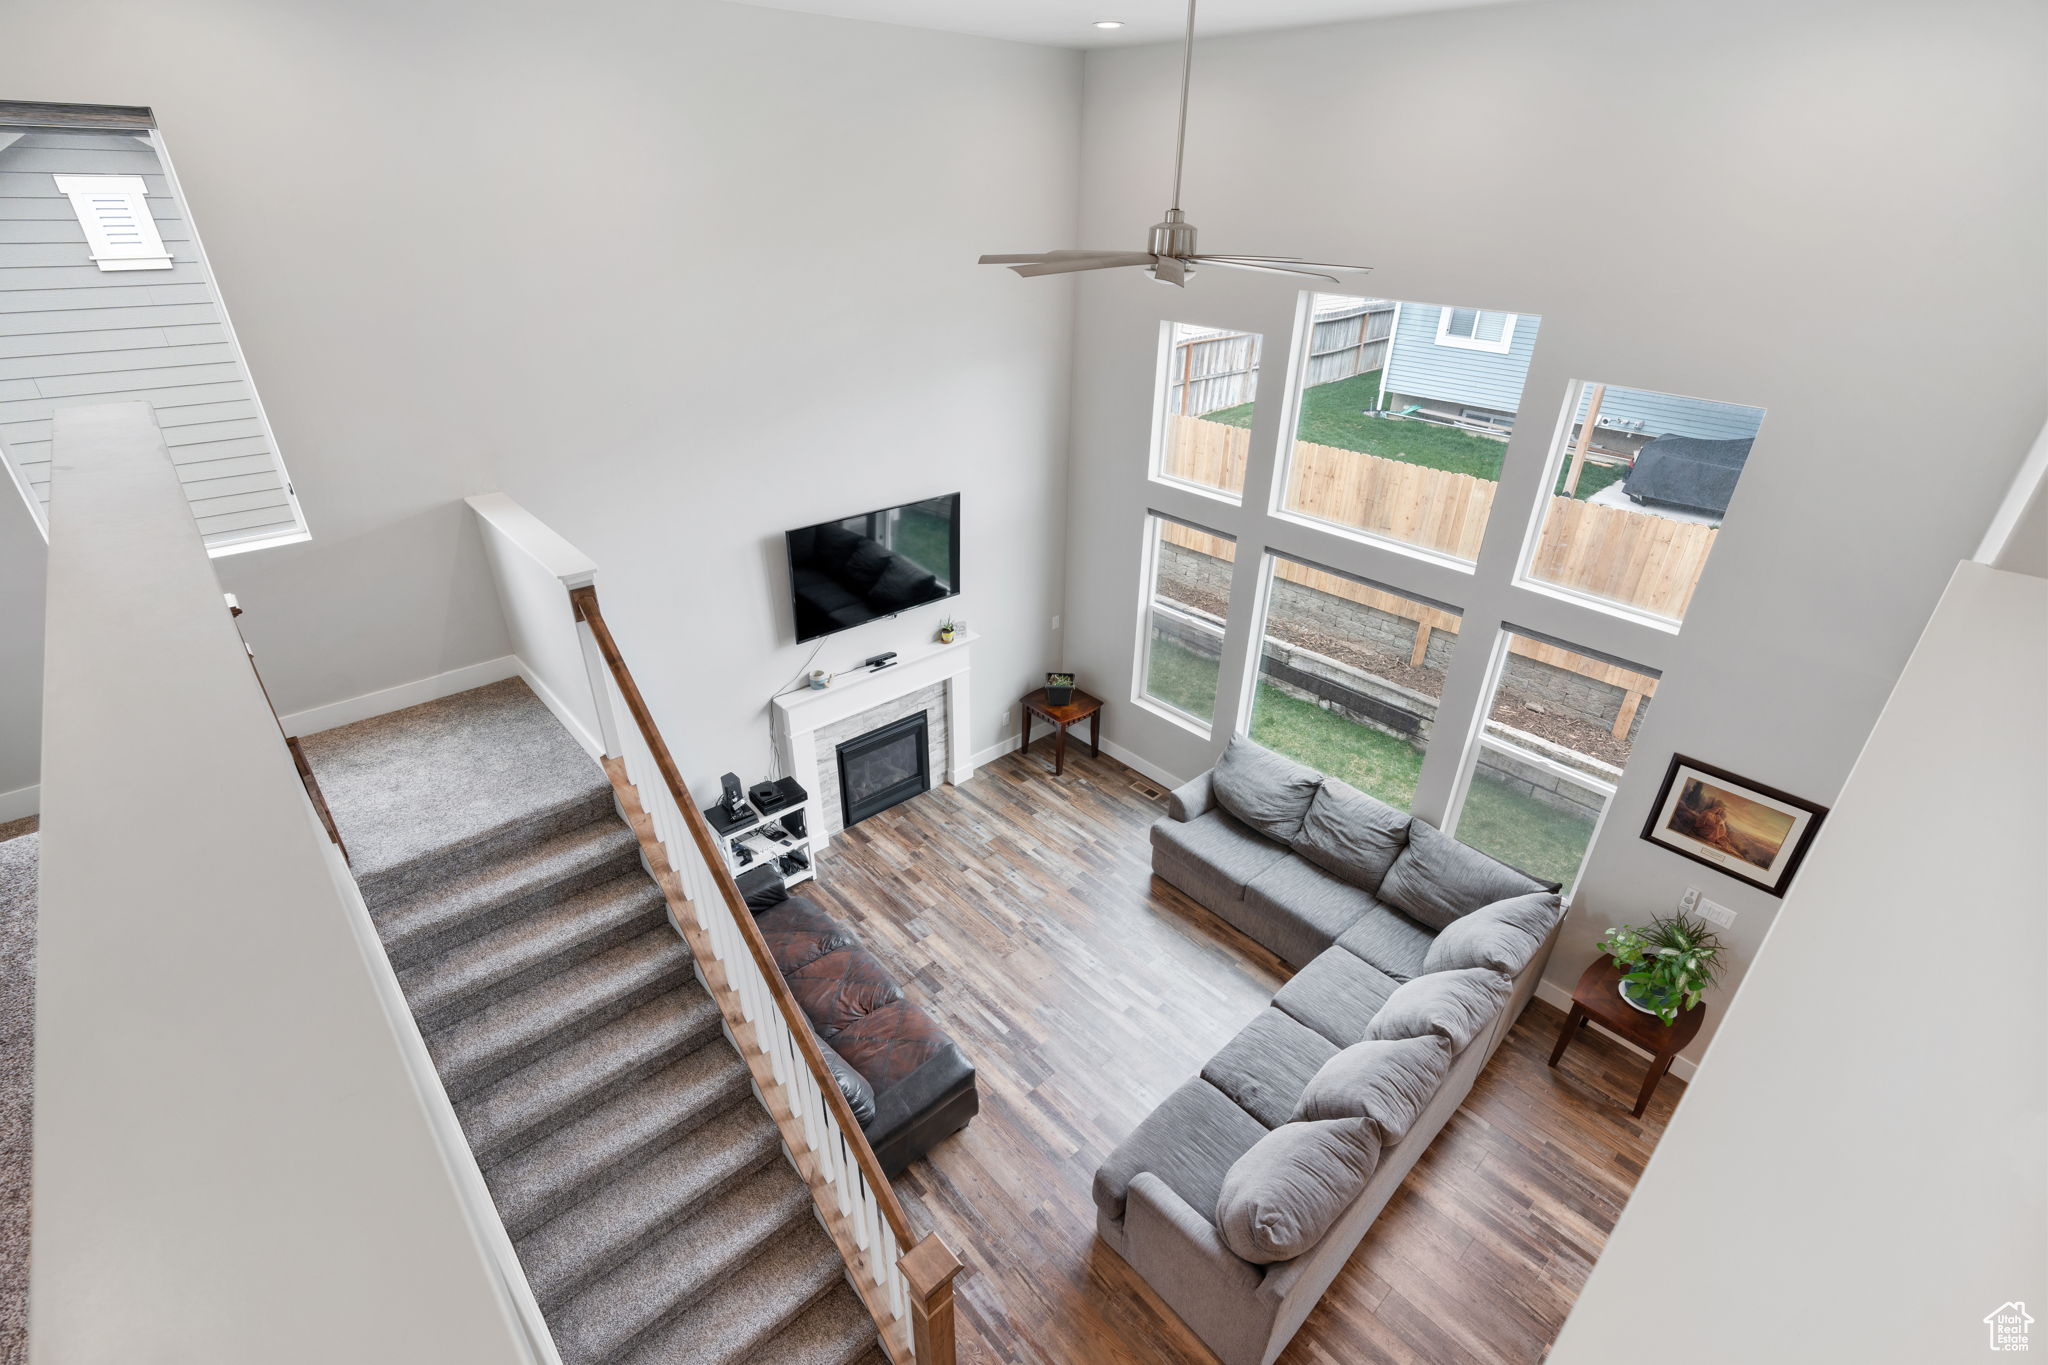 View into large family room below